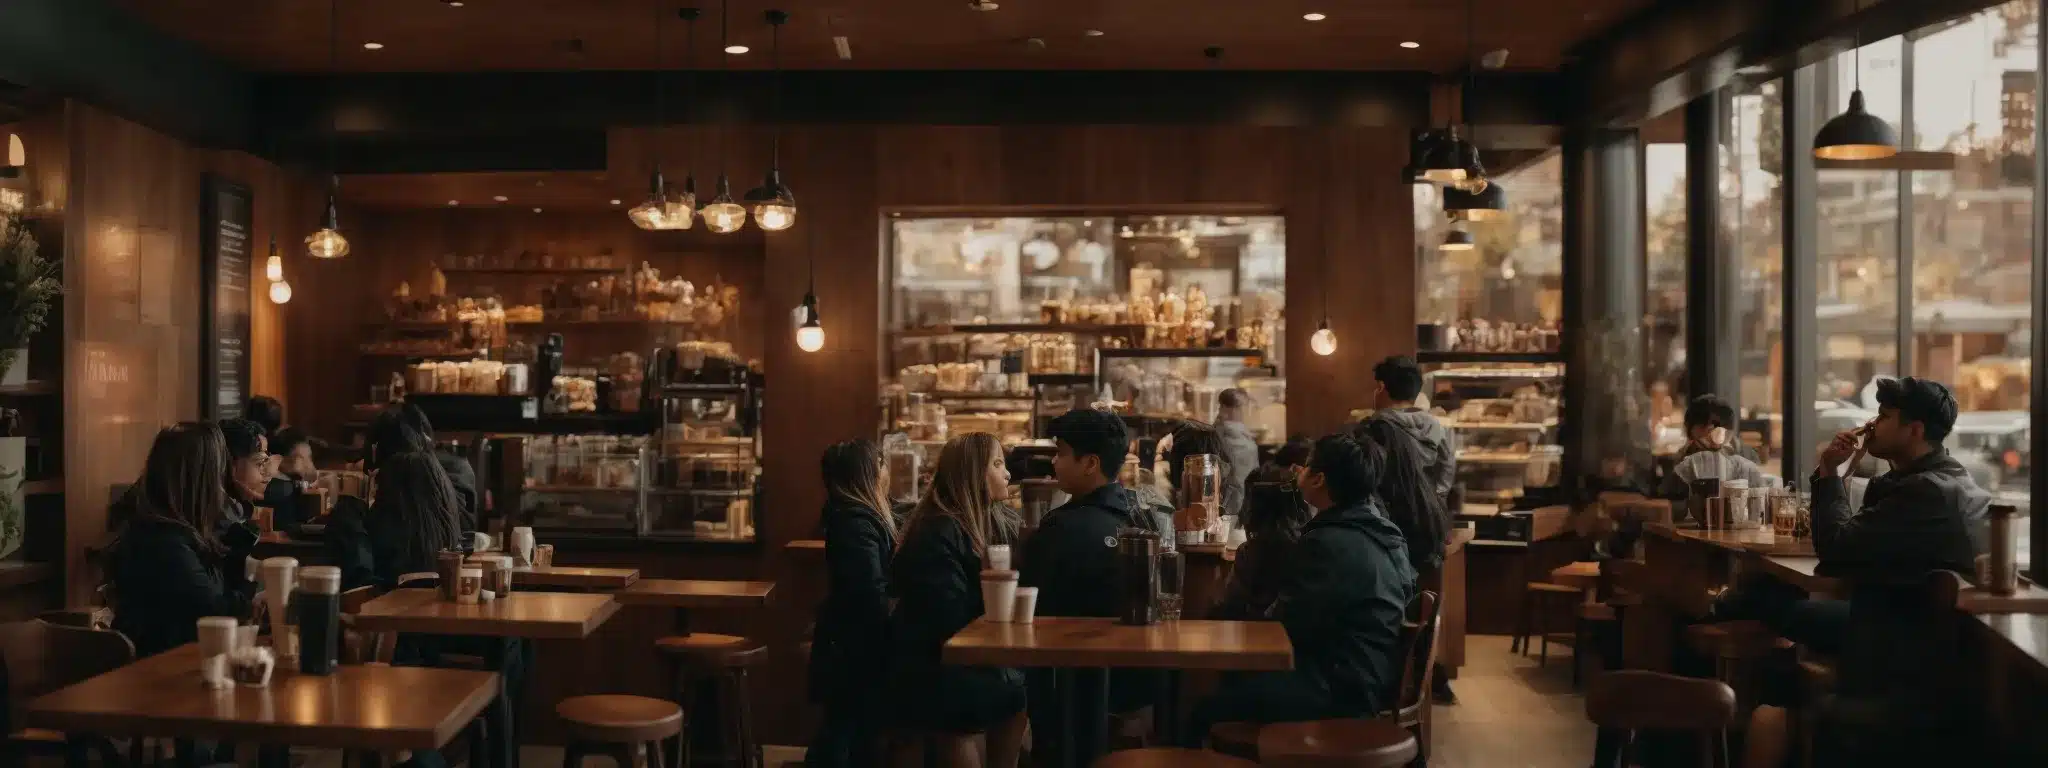 A Cozy Starbucks Interior With Customers Enjoying Their Drinks Amidst The Warm Ambiance.